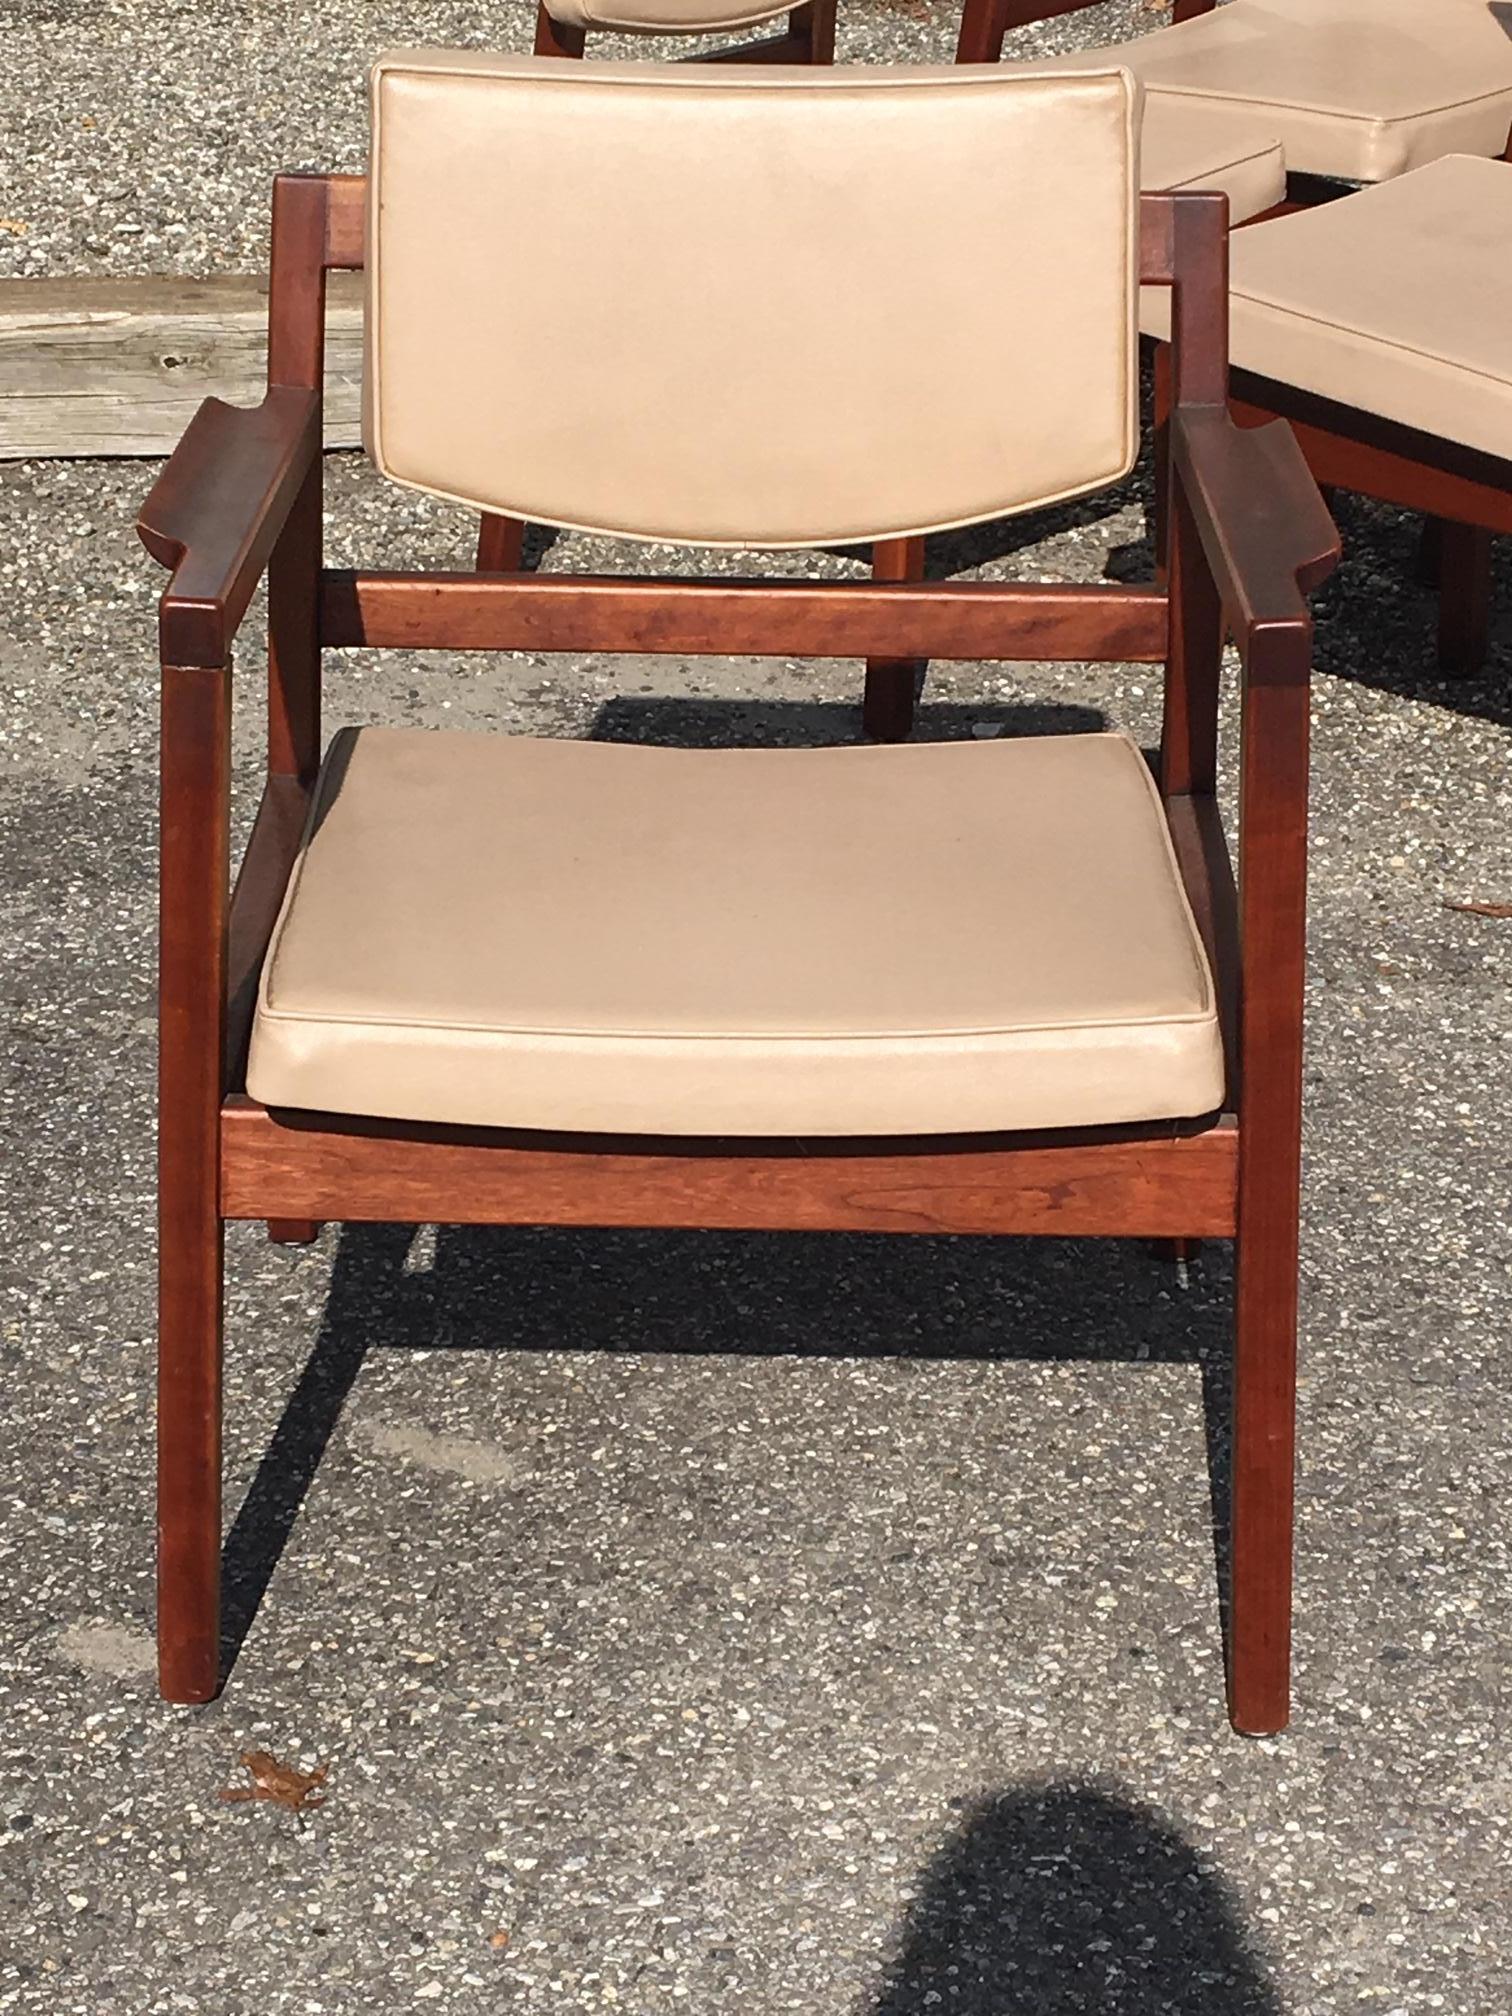 Set of 8 Original Jens Risom Walnut Dining Chairs in Original Leather Upholstery 1